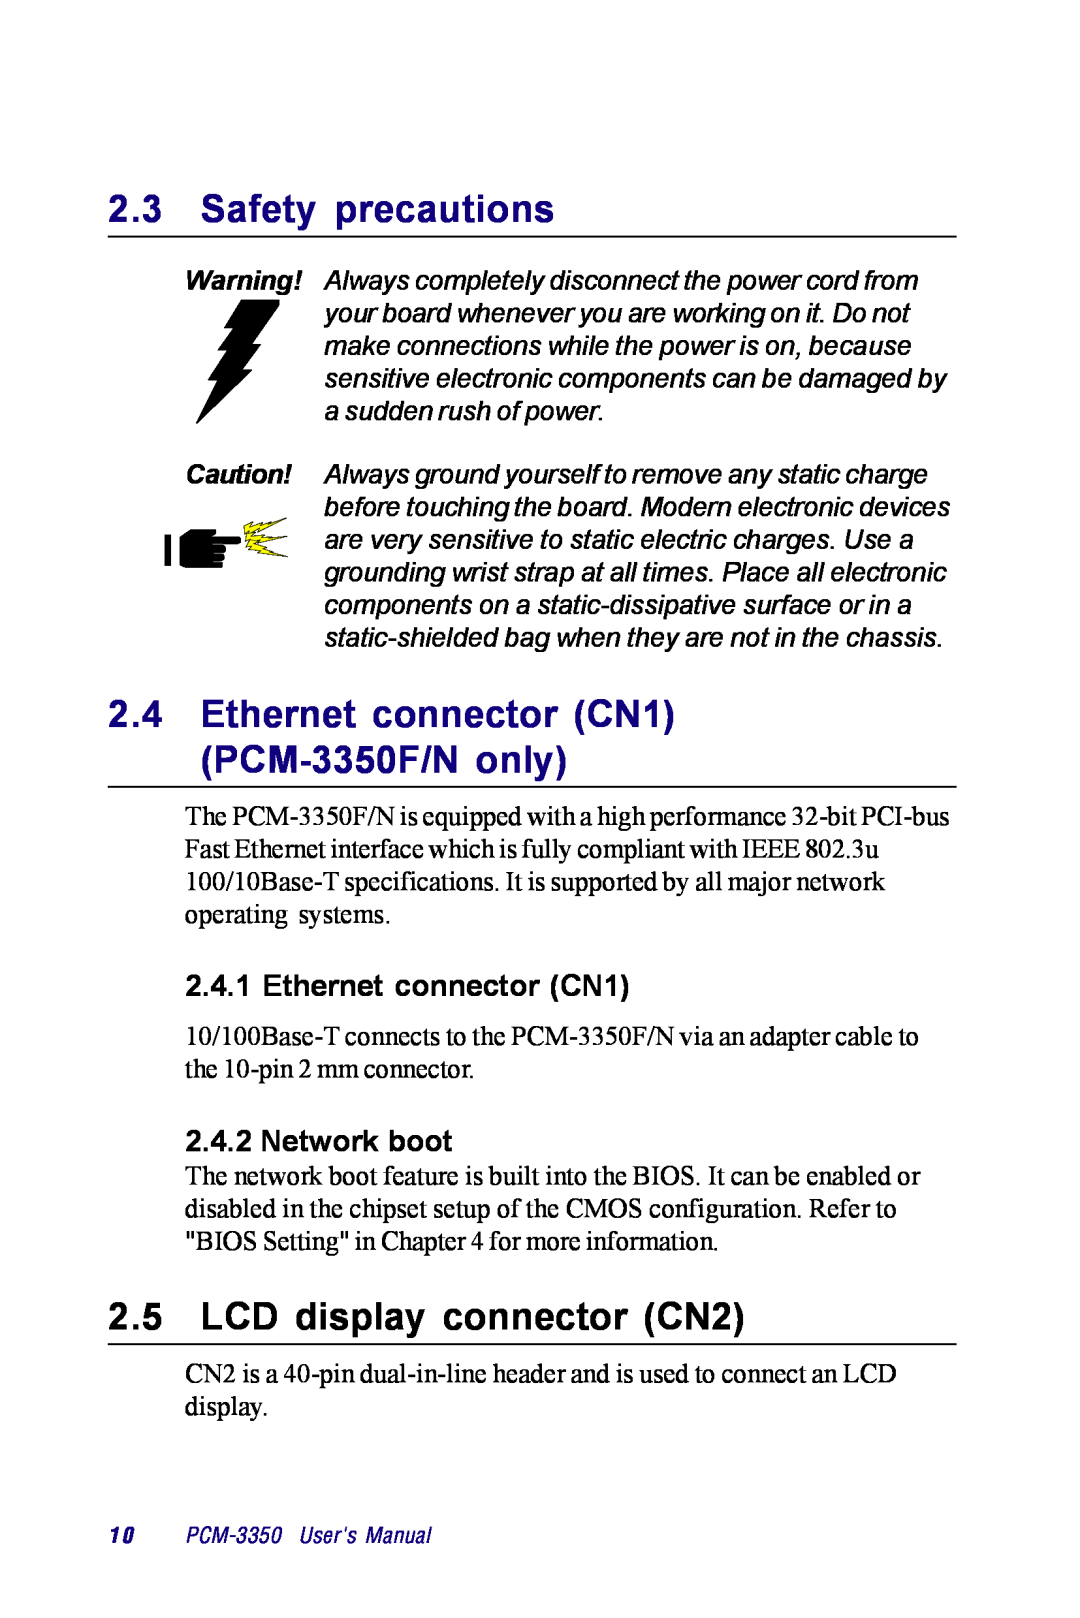 Advantech PCM-3350 Series user manual Safety precautions, Ethernet connector CN1 PCM-3350F/N only, Network boot 